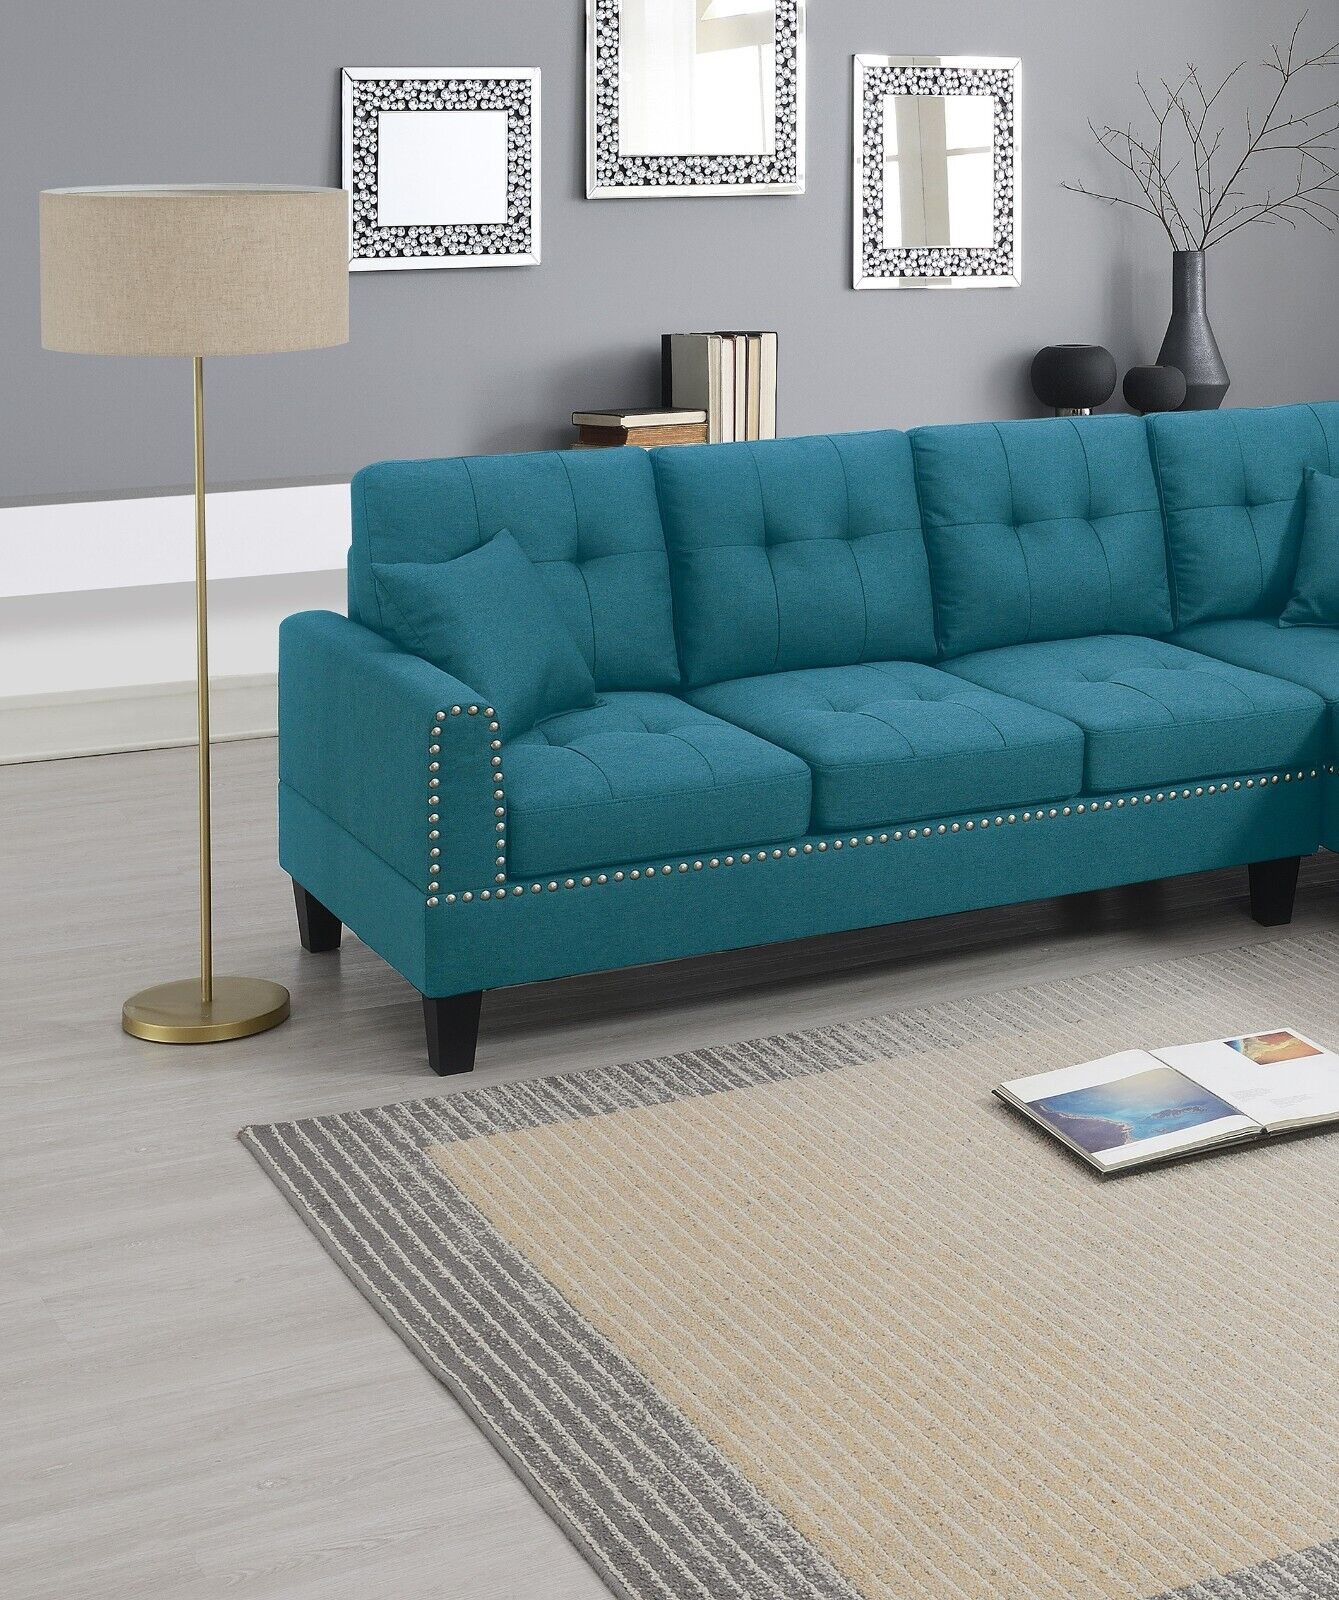 Esofastore Living Room Furniture Azure Fabric Tufted Cushion Couch 2pcs Sectional Set RAF Chaise LAF Sofa 